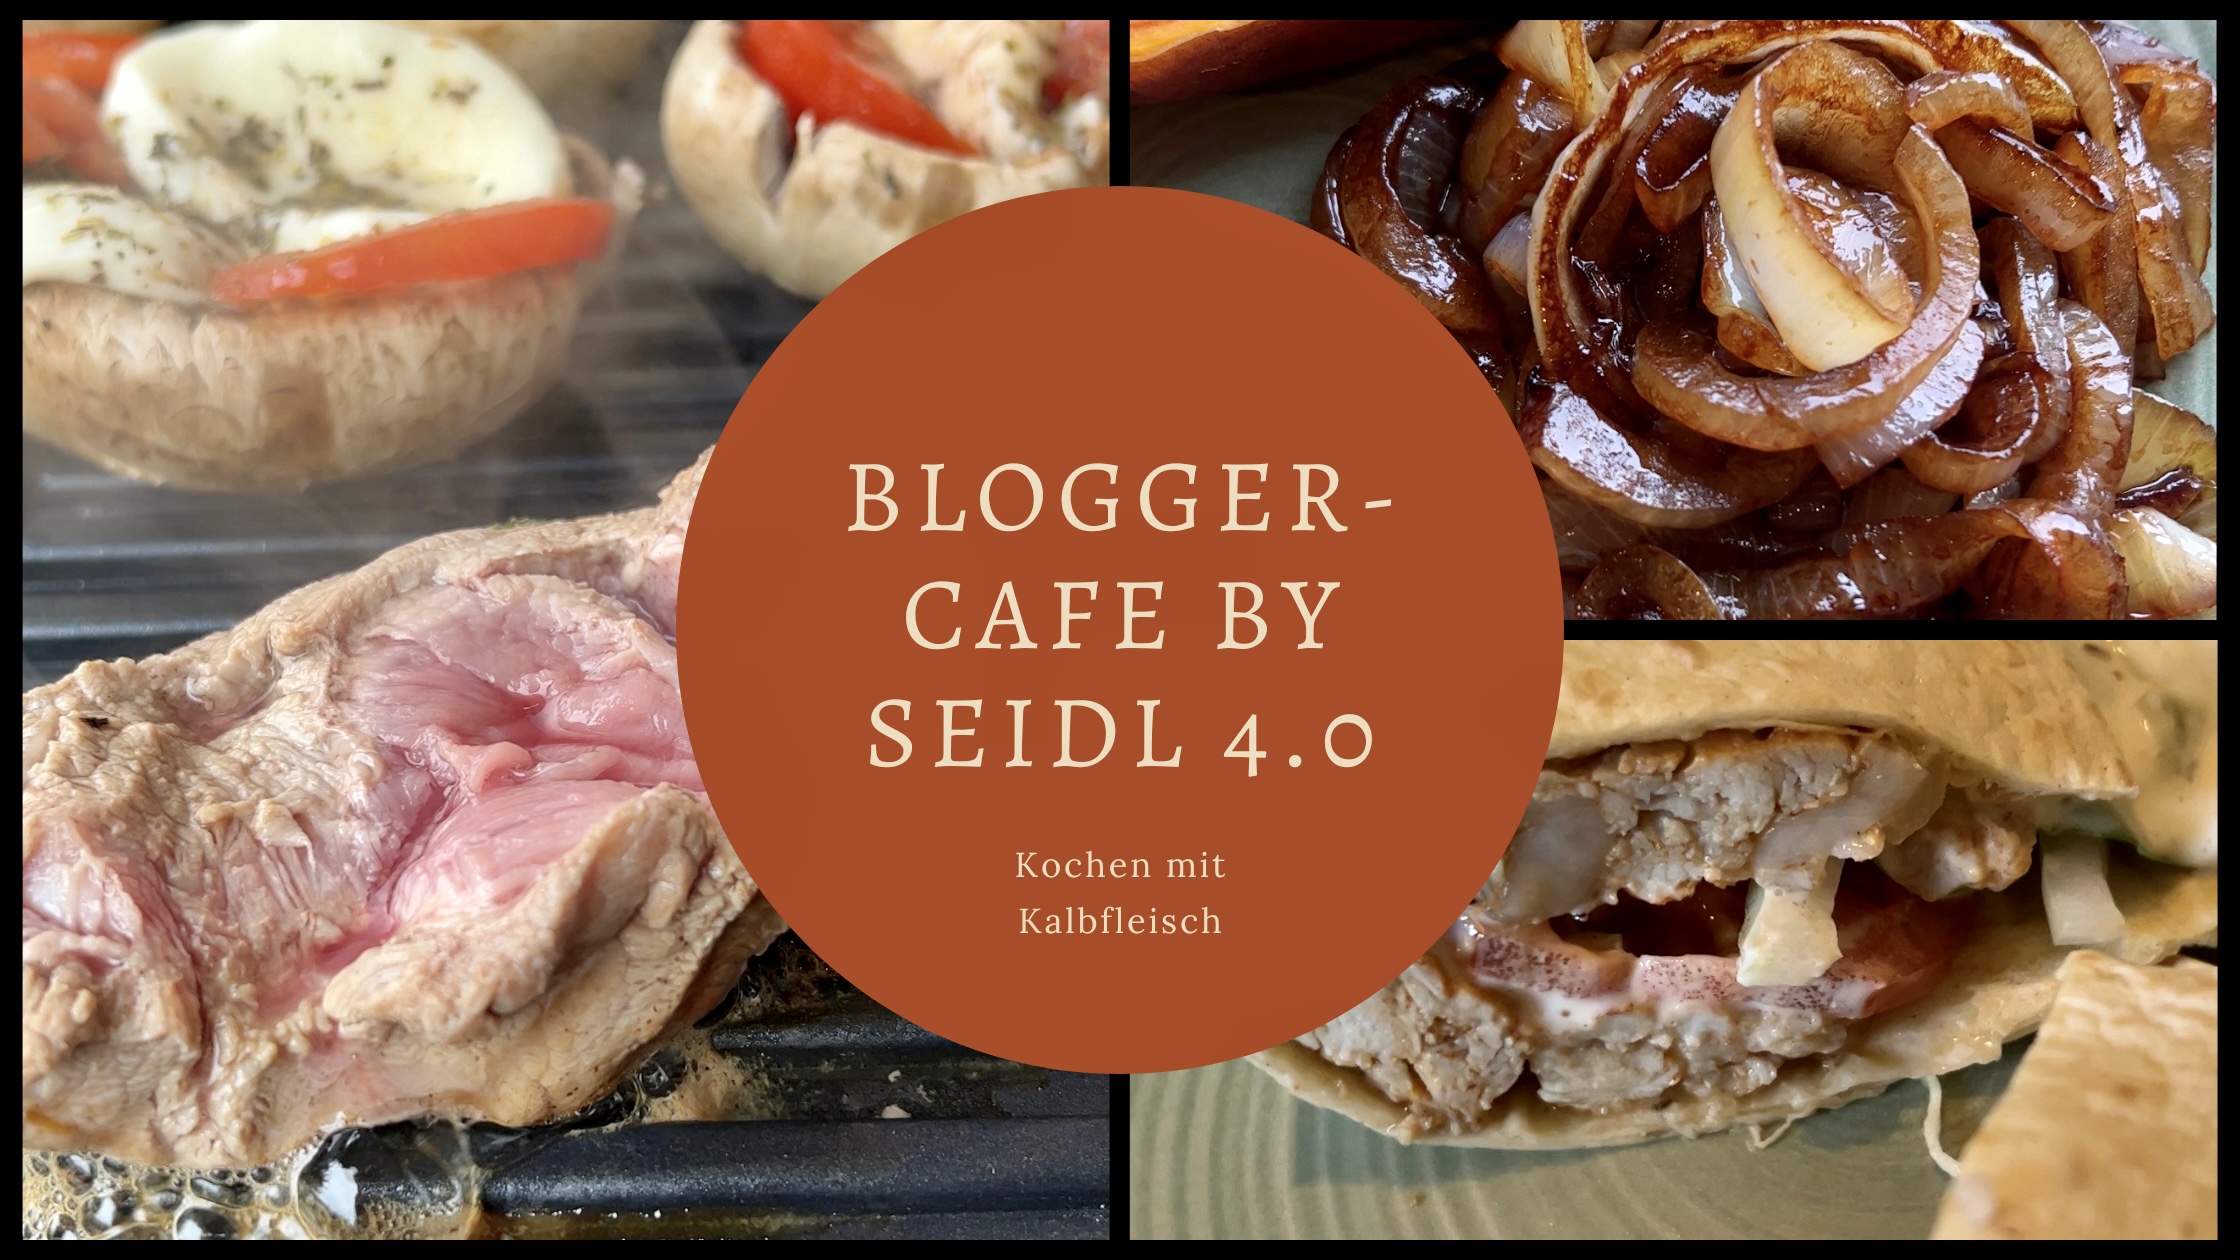 Bloggercafe by Seidl 4.0